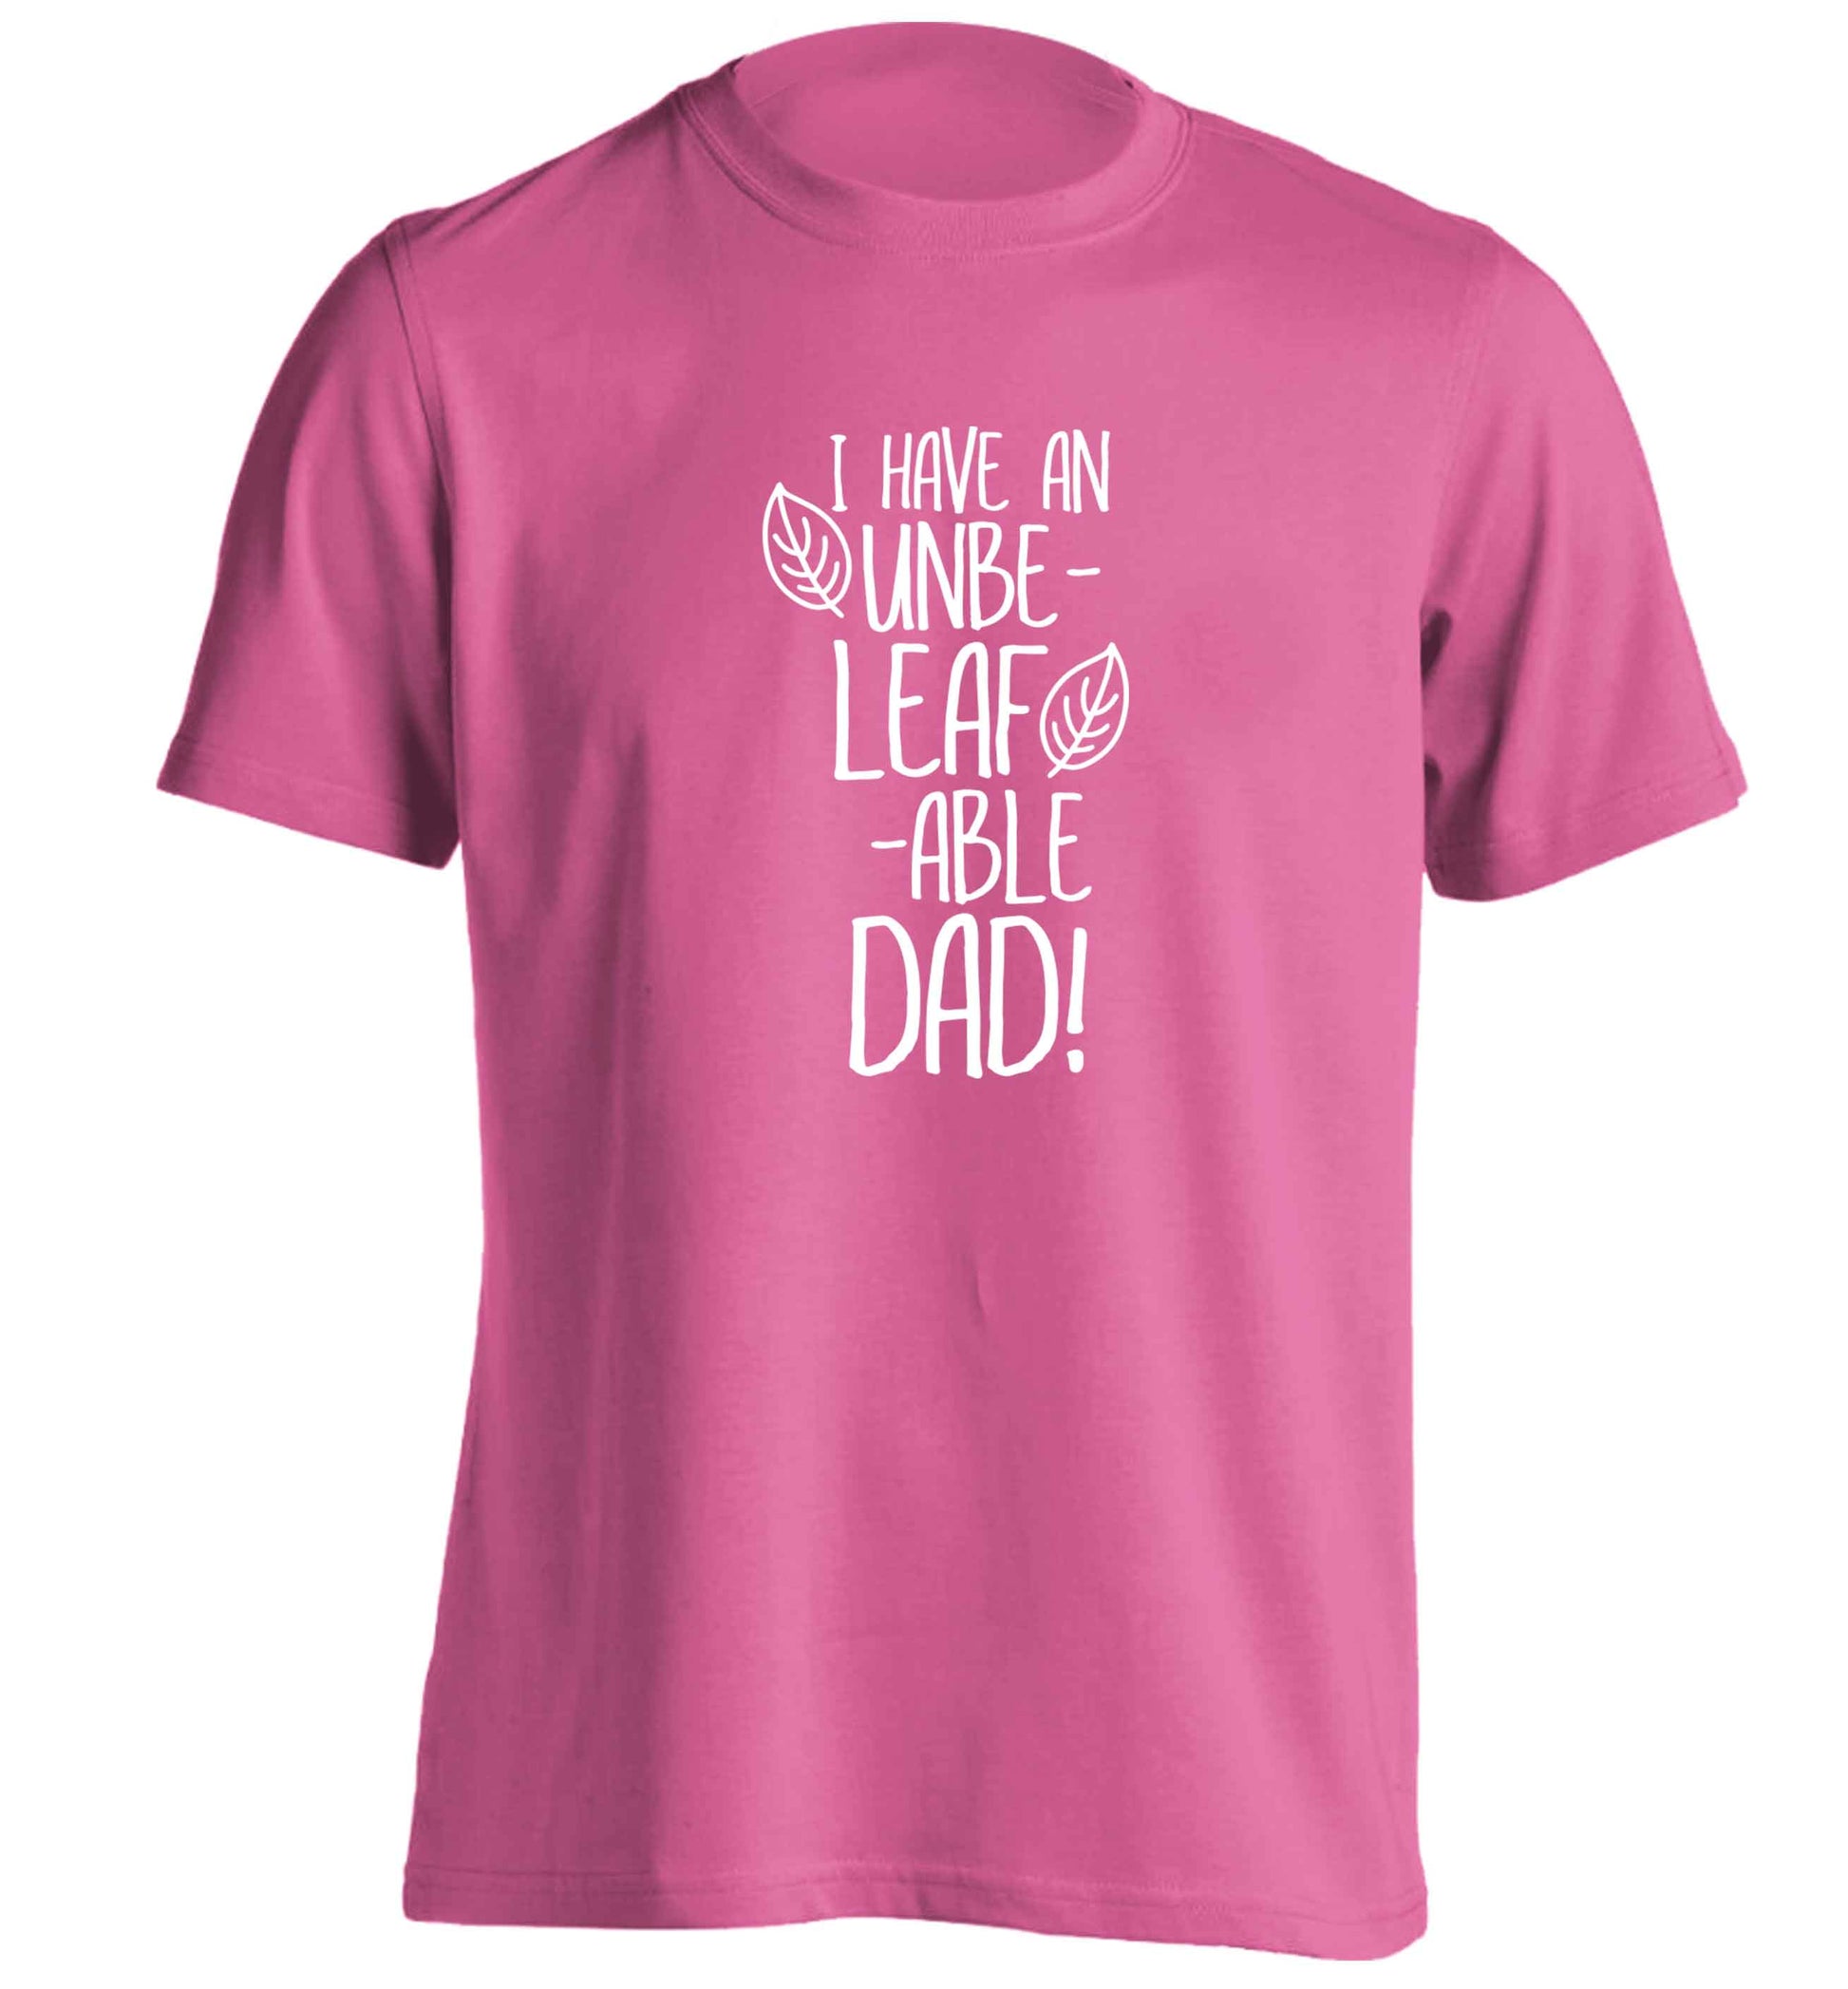 I have an unbe-leaf-able dad adults unisex pink Tshirt 2XL